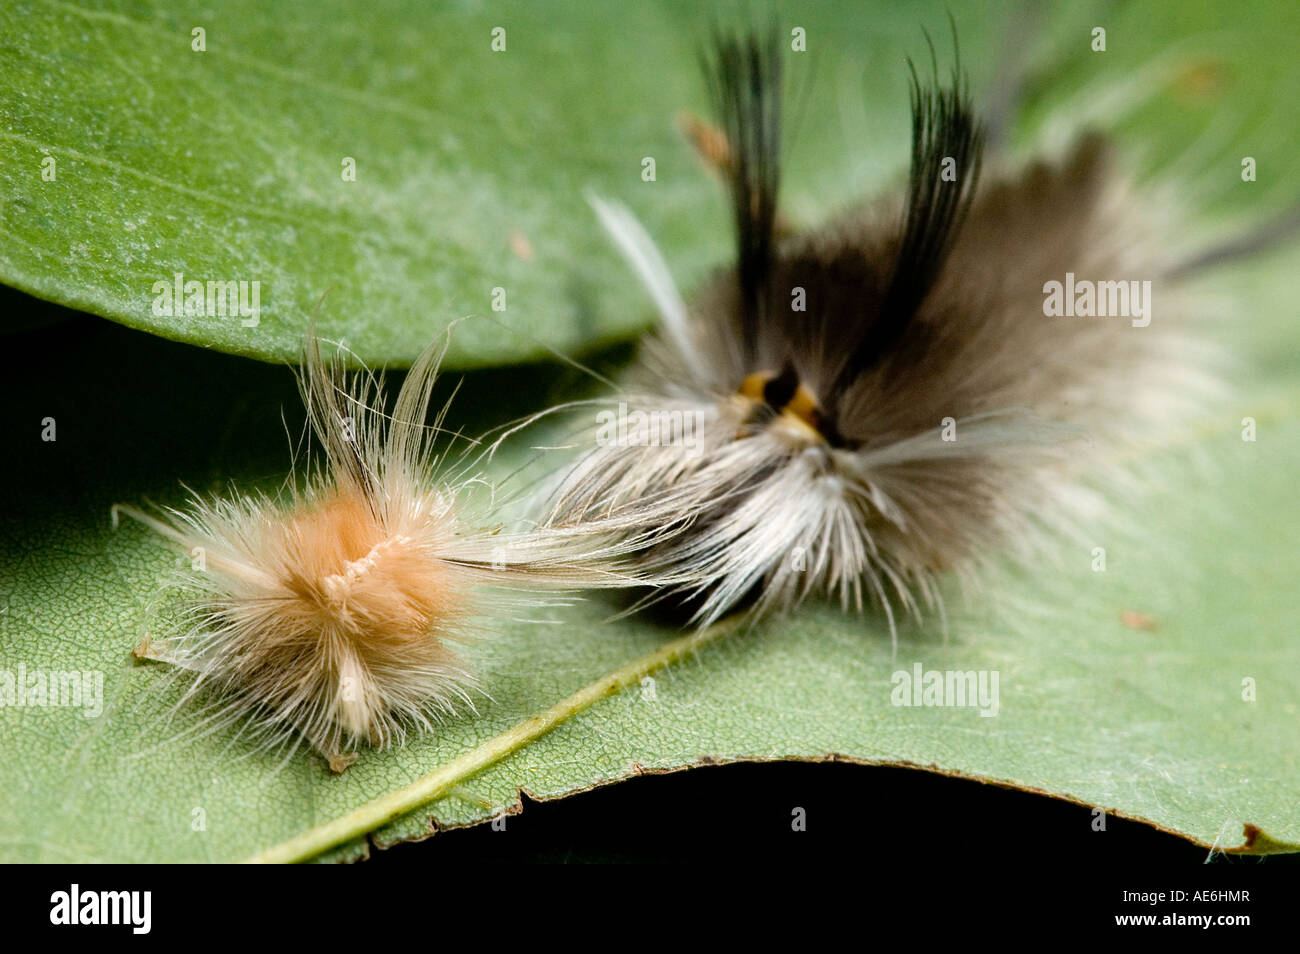 Furry caterpillars on a leaf Stock Photo